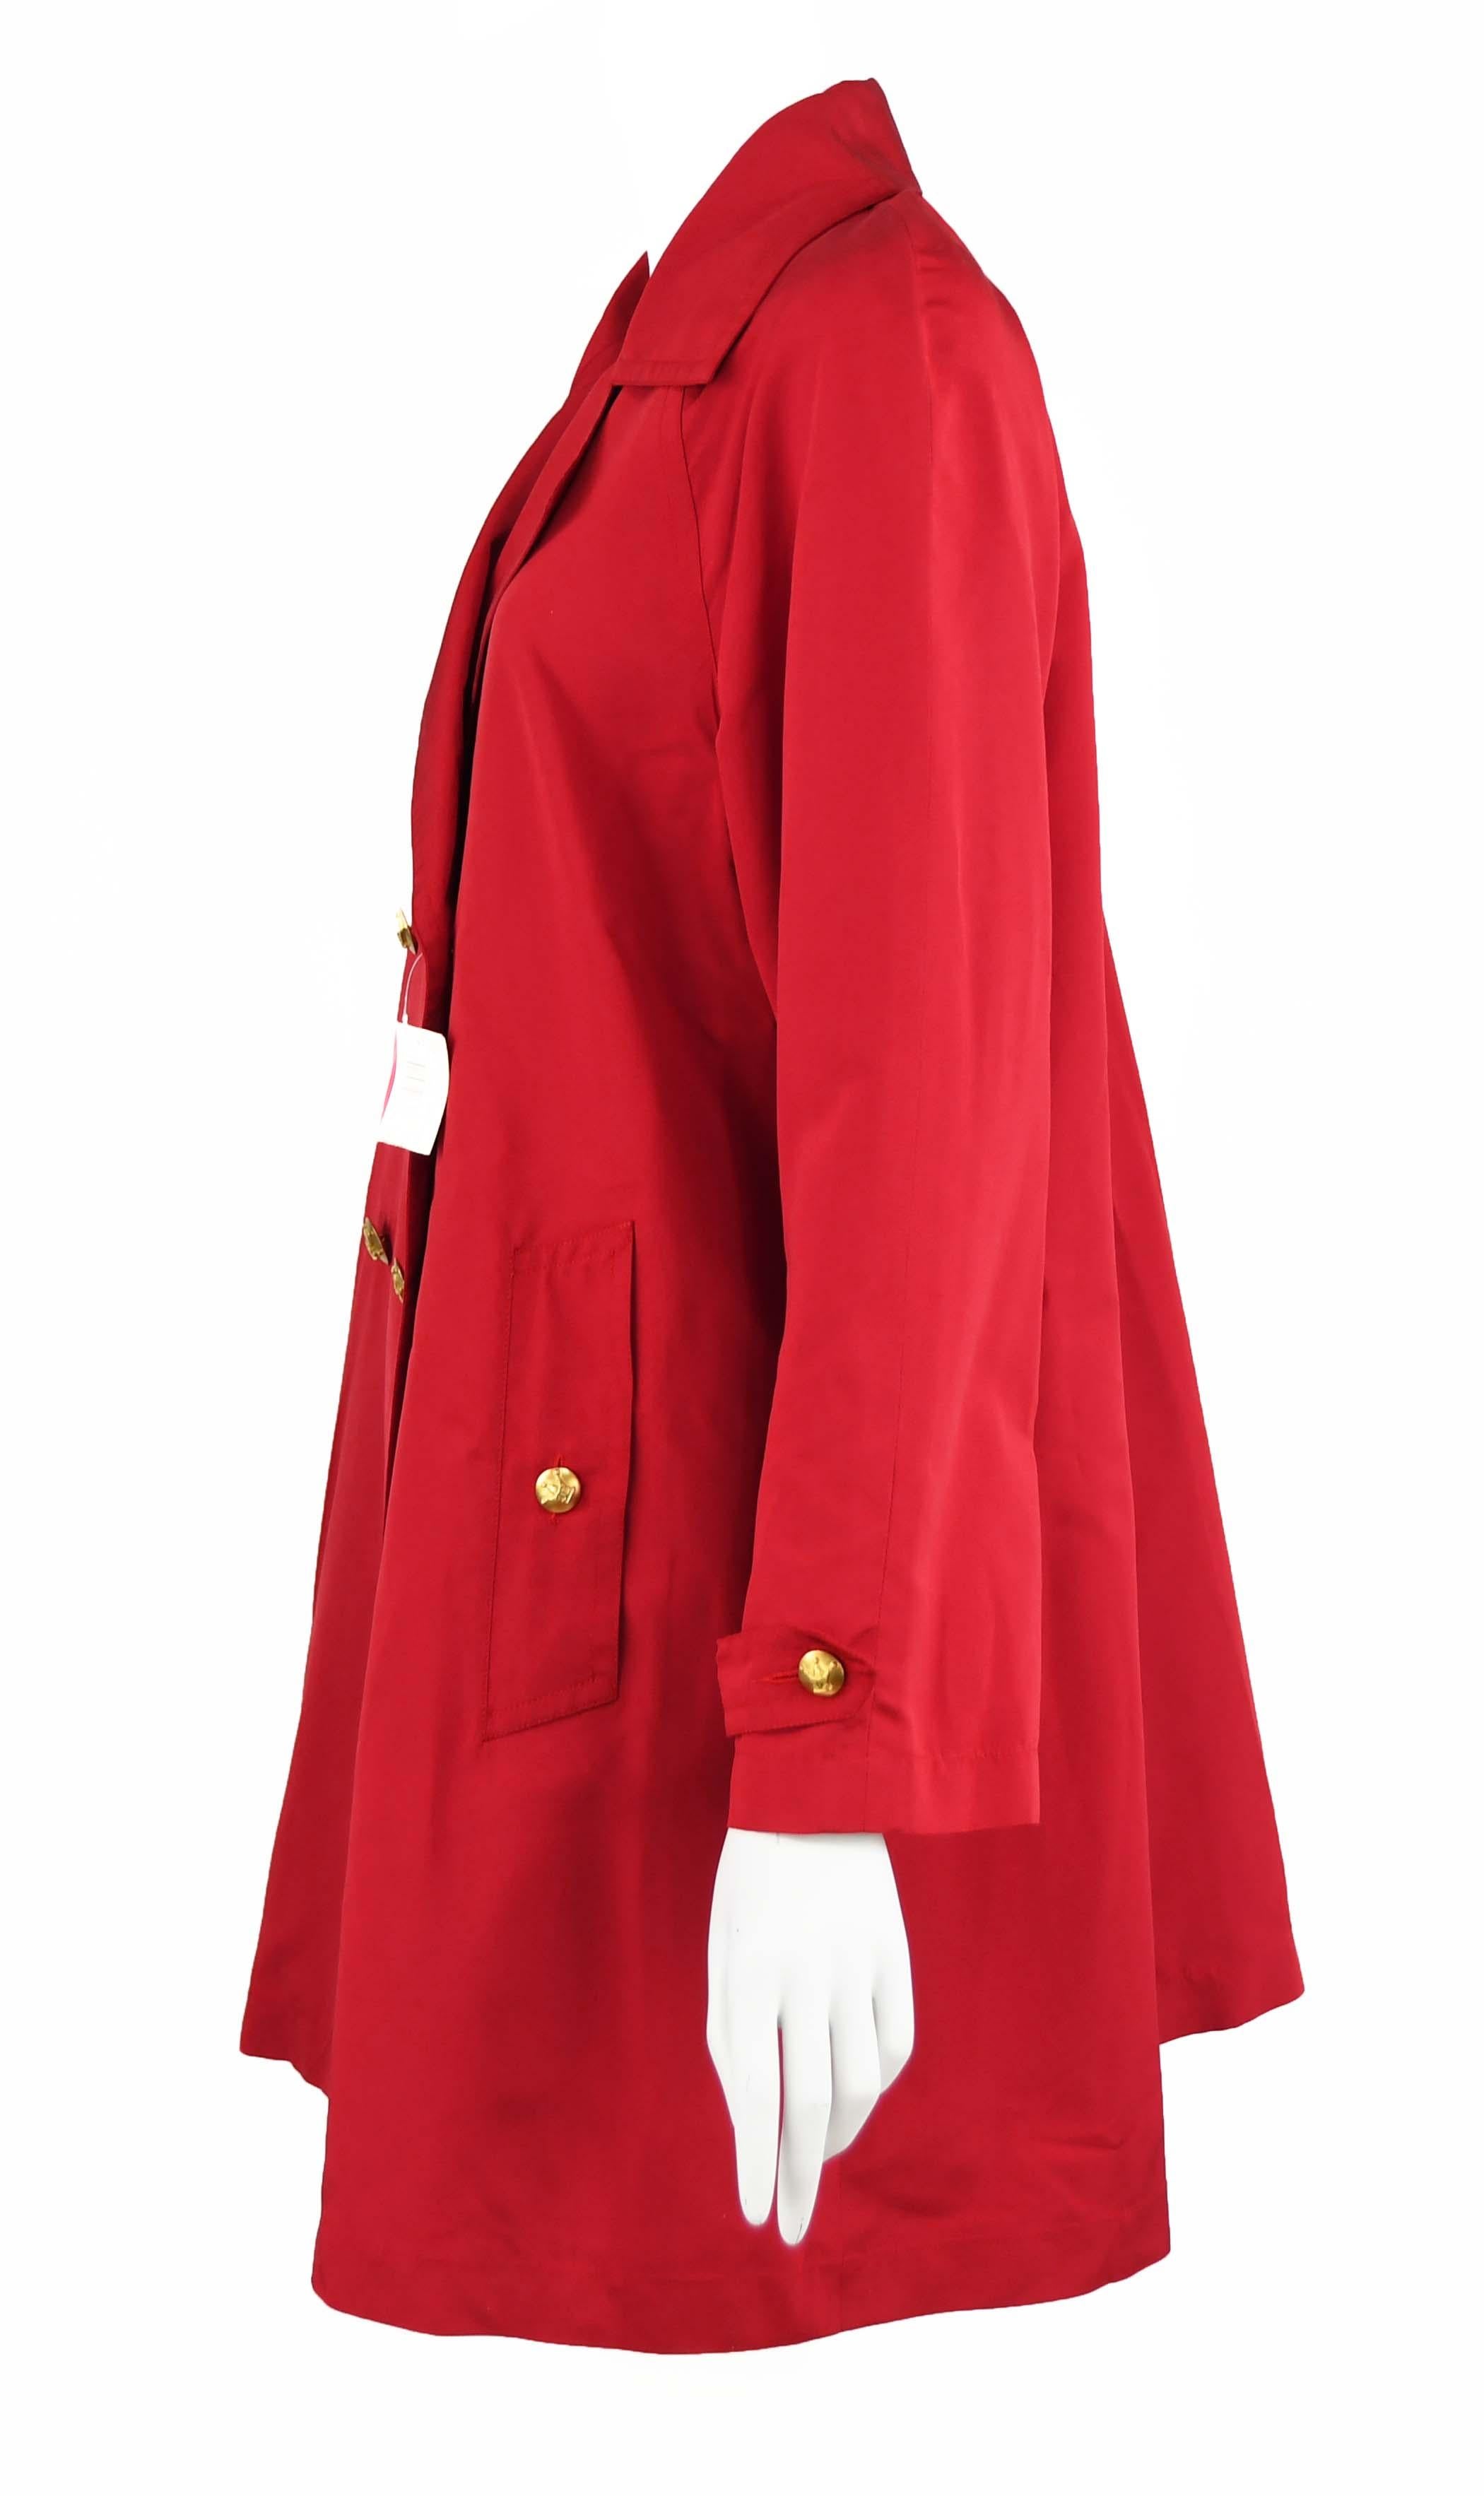 Chanel Vintage Red Rain Coat with Gold Buttons - Size FR 34 In Excellent Condition For Sale In Newport, RI